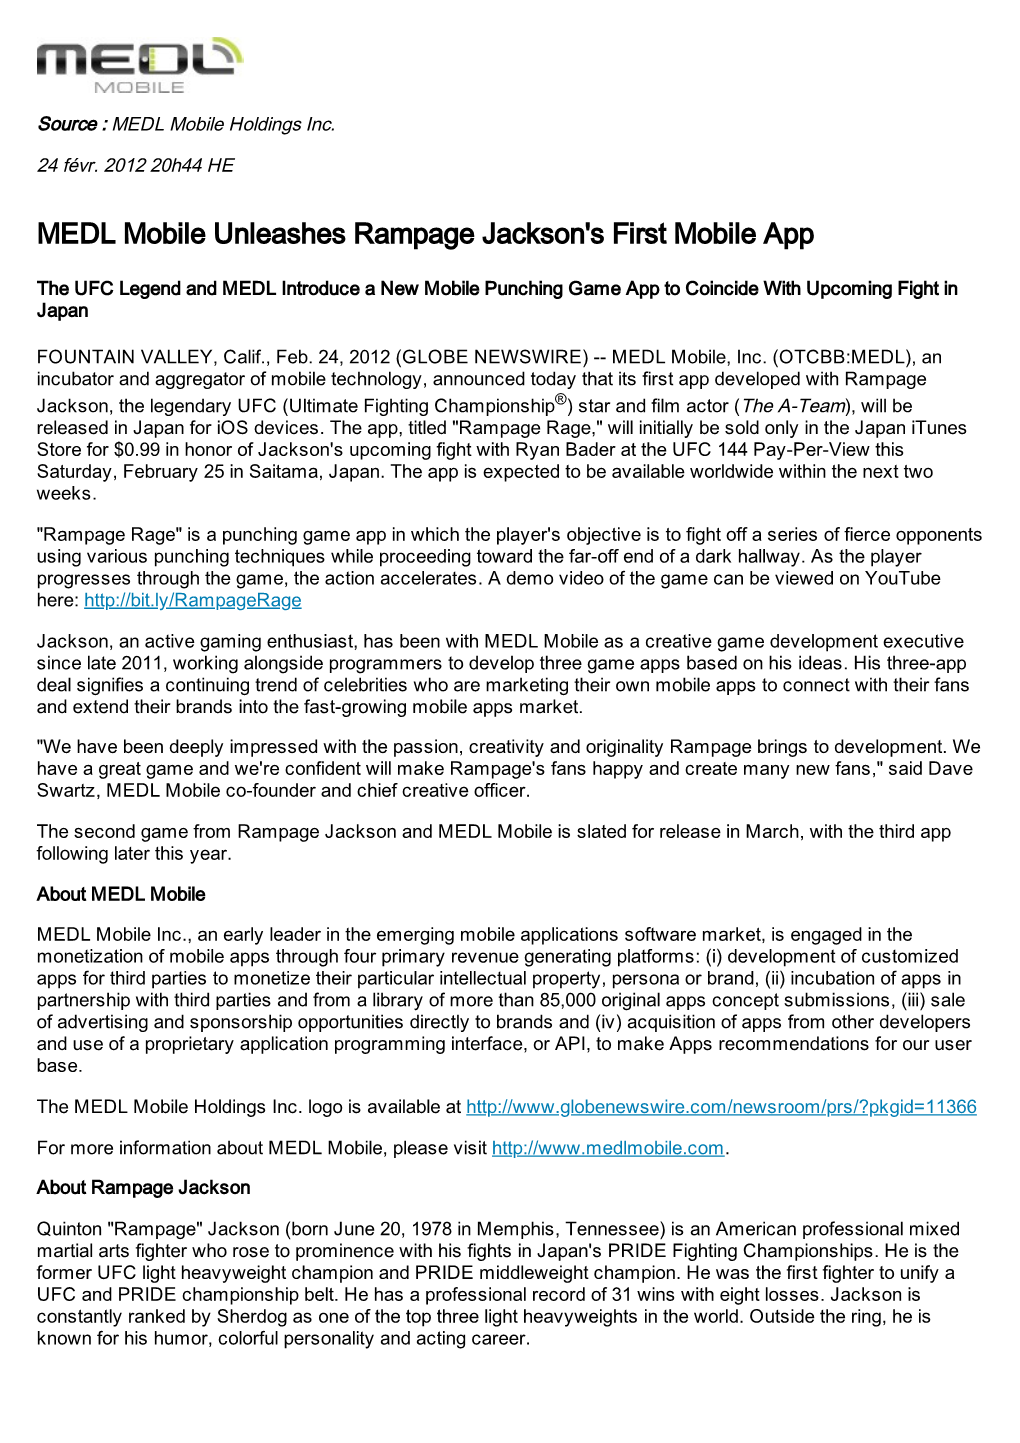 MEDL Mobile Unleashes Rampage Jackson's First Mobile App